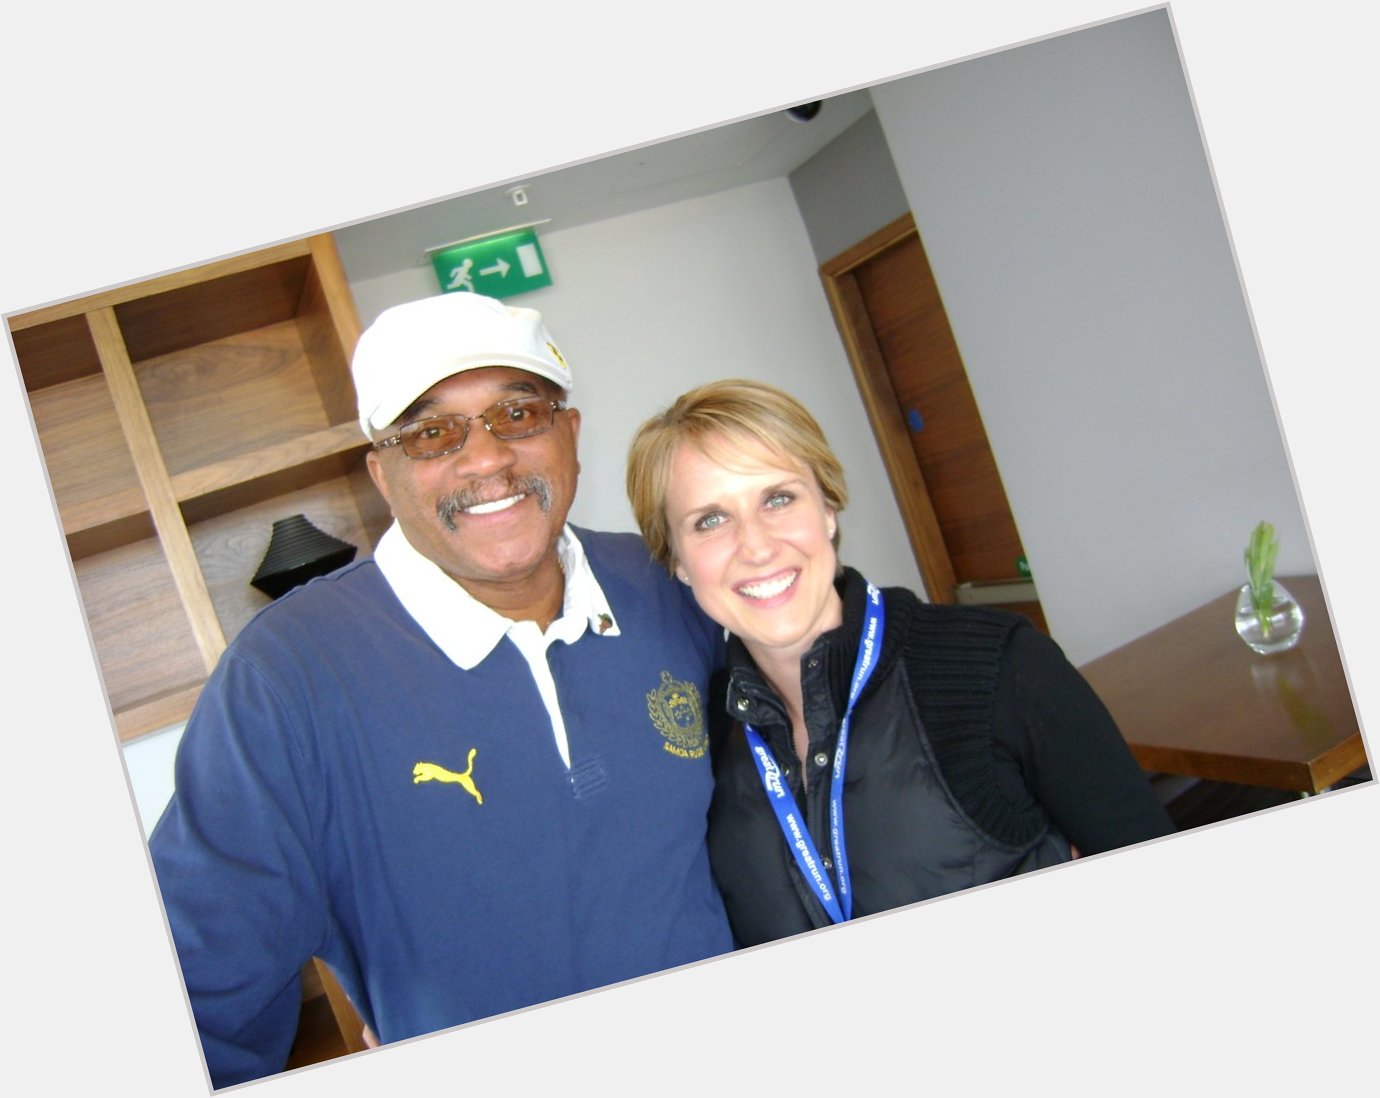 Happy Birthday Tommie Smith . the pleasure was all mine 10 years ago a sprint legend but so much more  